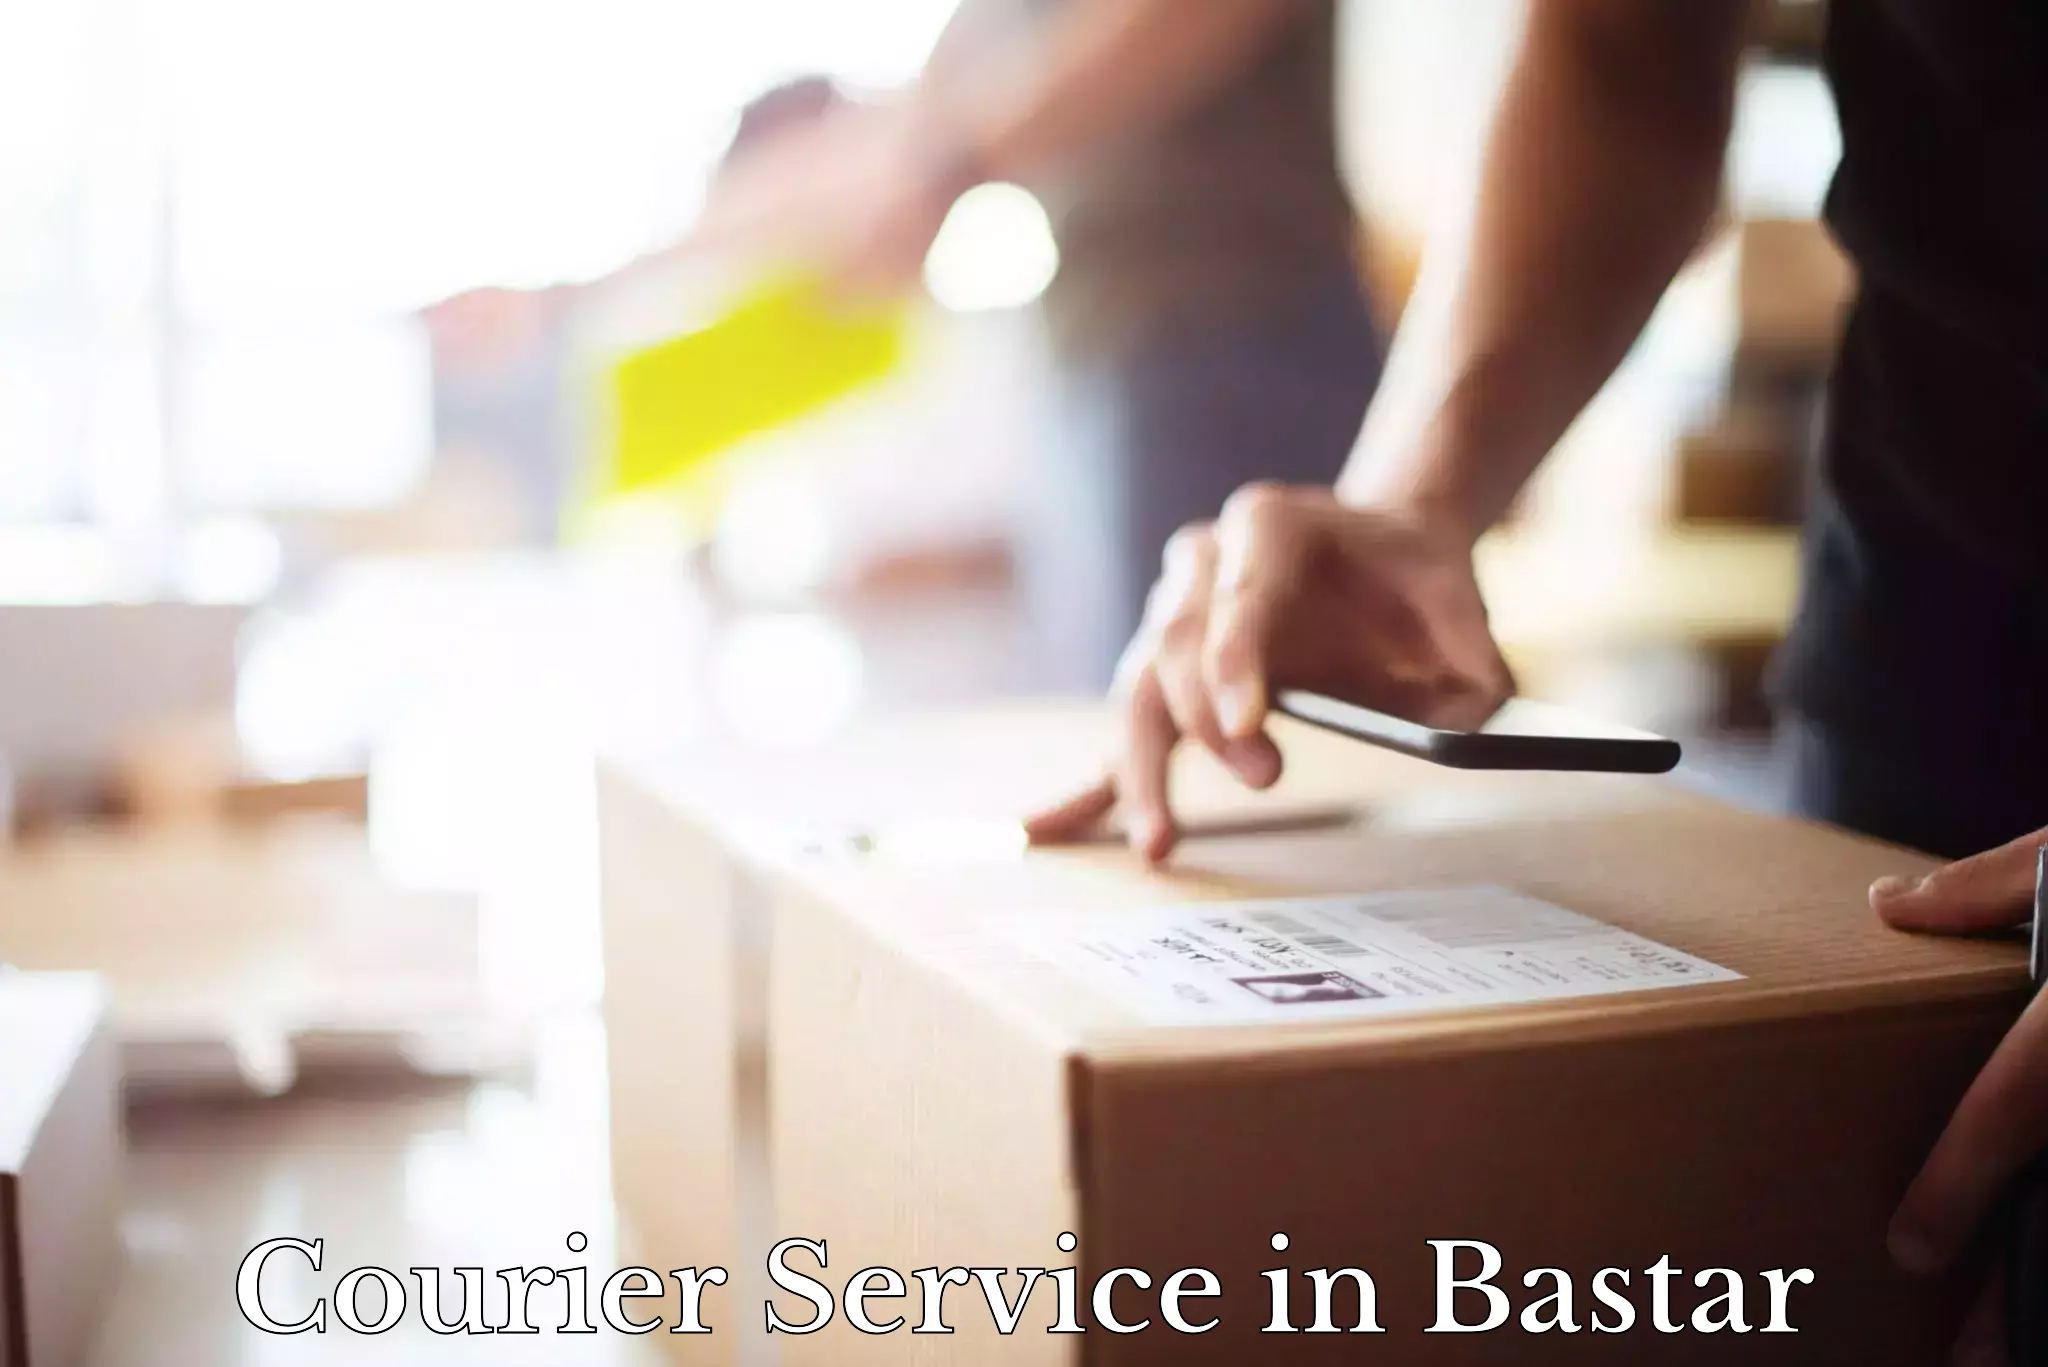 Cash on delivery service in Bastar